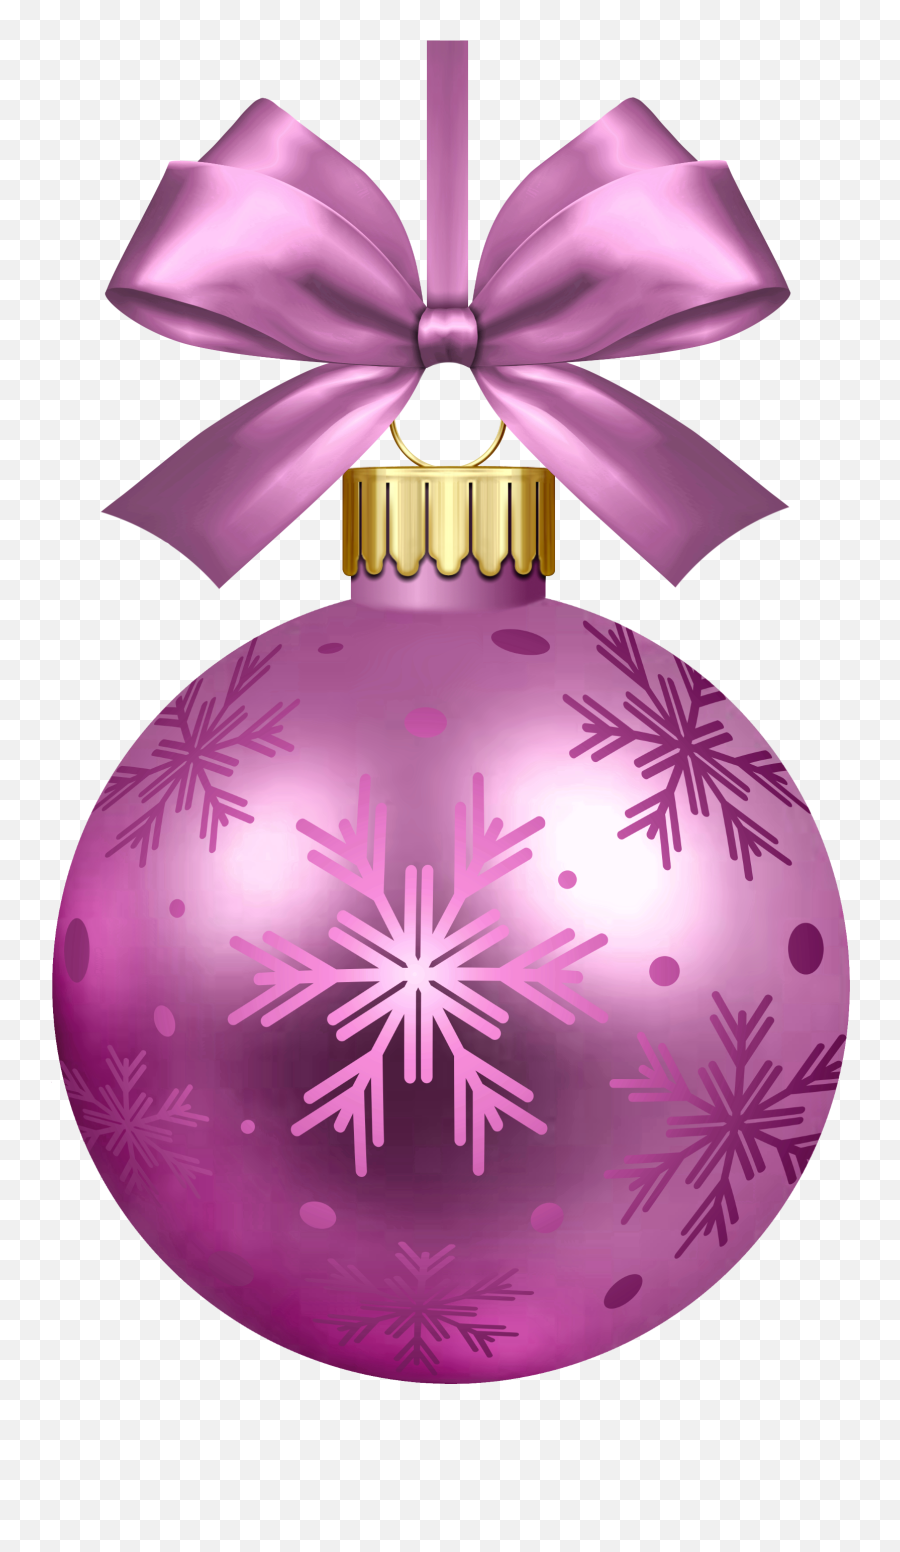 Purple Christmas Bauble Png Image - Purepng Free Purple Christmas Bauble Png Emoji,Christmas Png